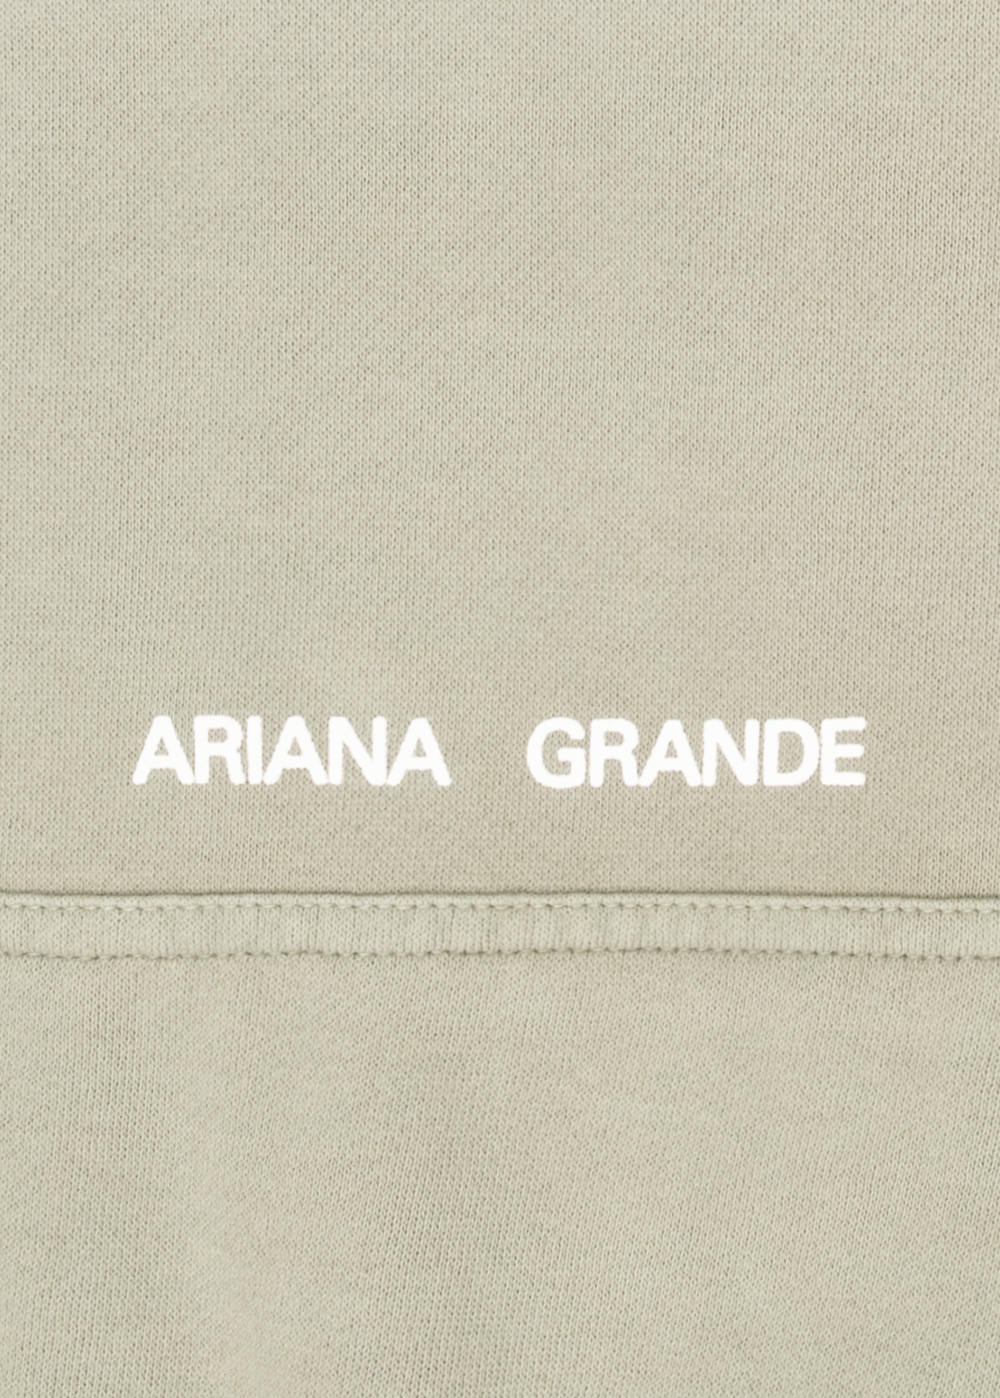 Ariana Grande - Positions Inverted Cover Hoodie